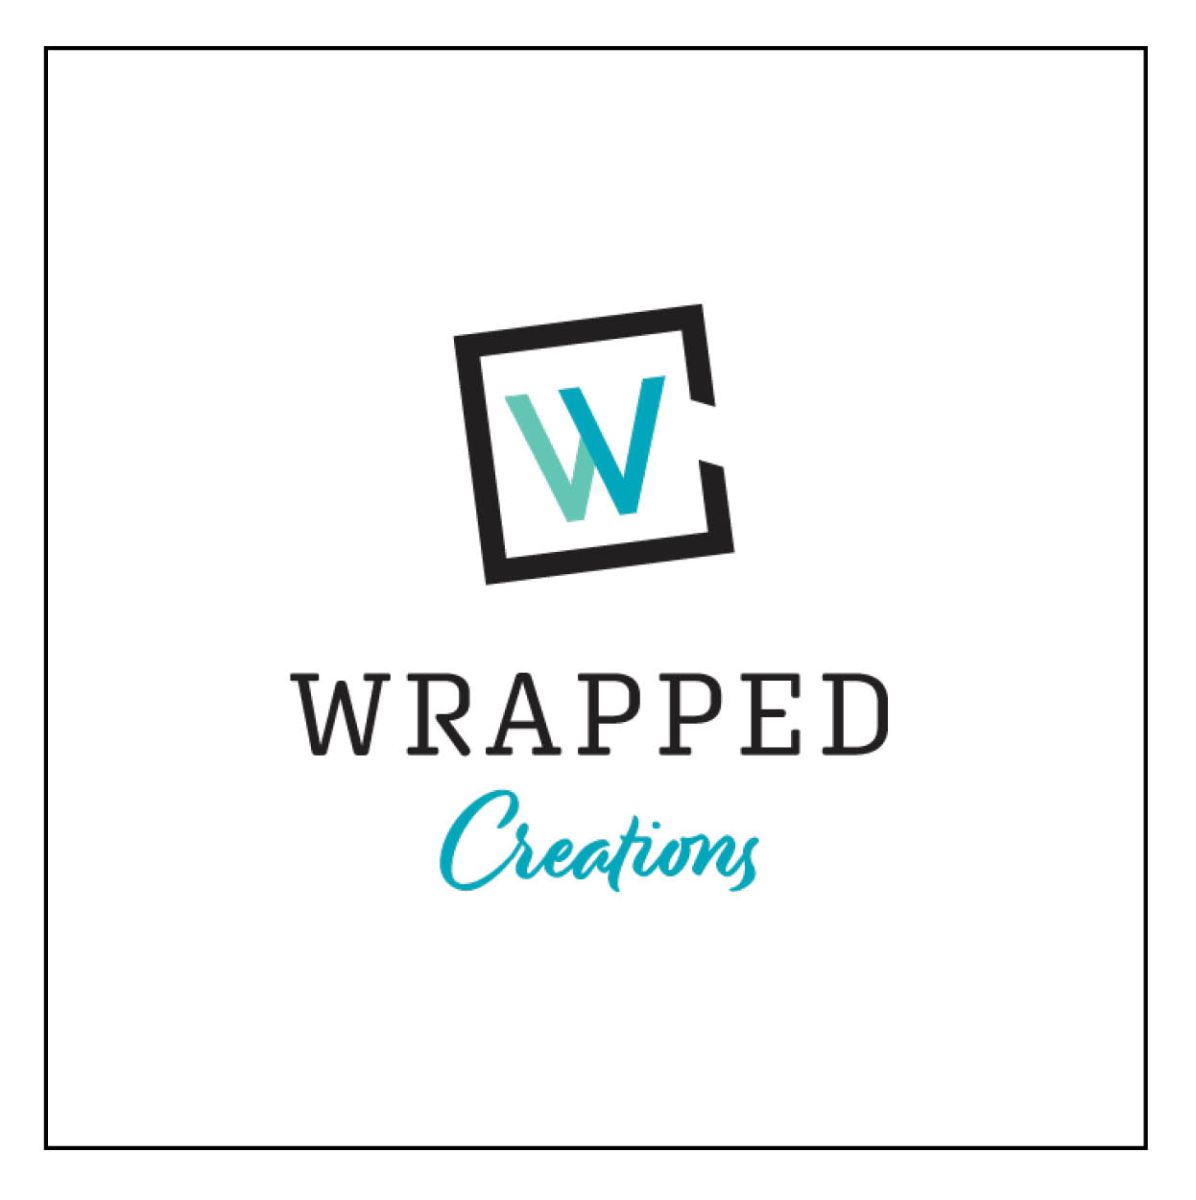 Wrapped Creations